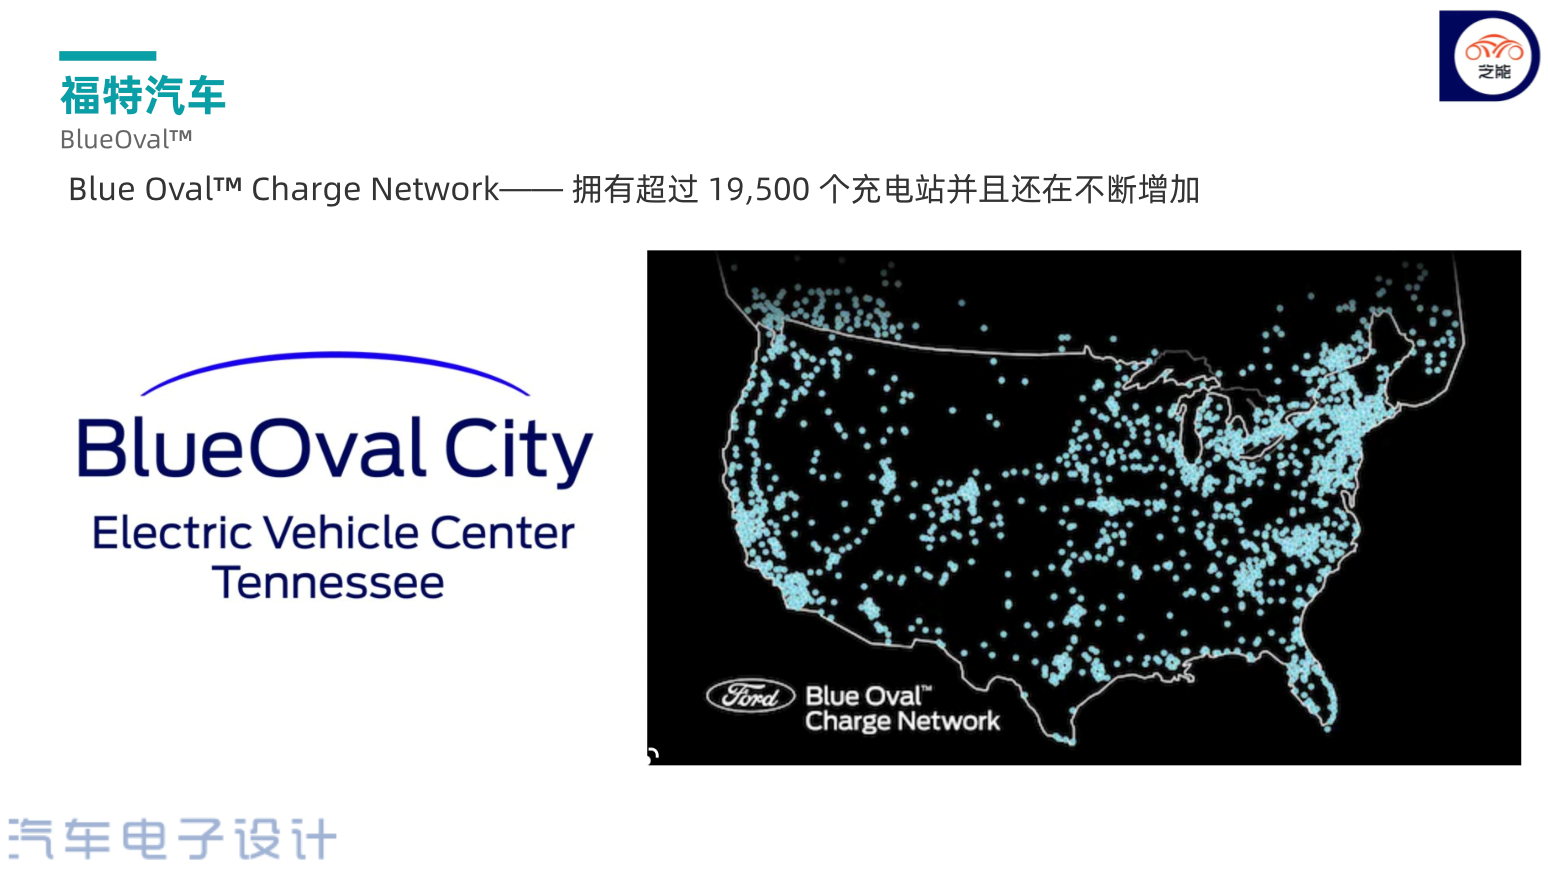 ▲ Figure 2. Ford's BlueOval™ charging network